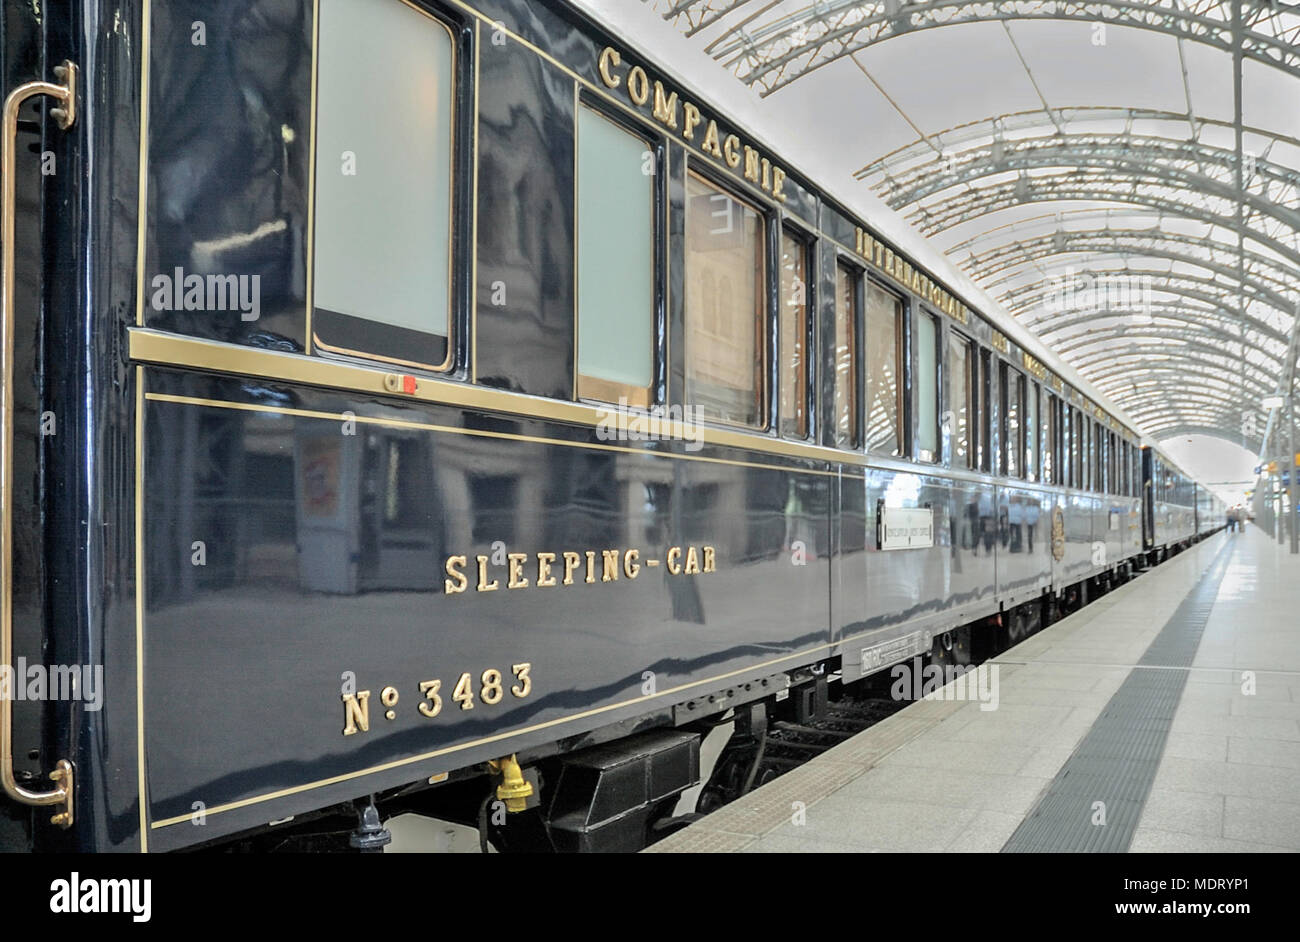 Venice Simplon-Orient-Express comes to Brussels in June 2021 and